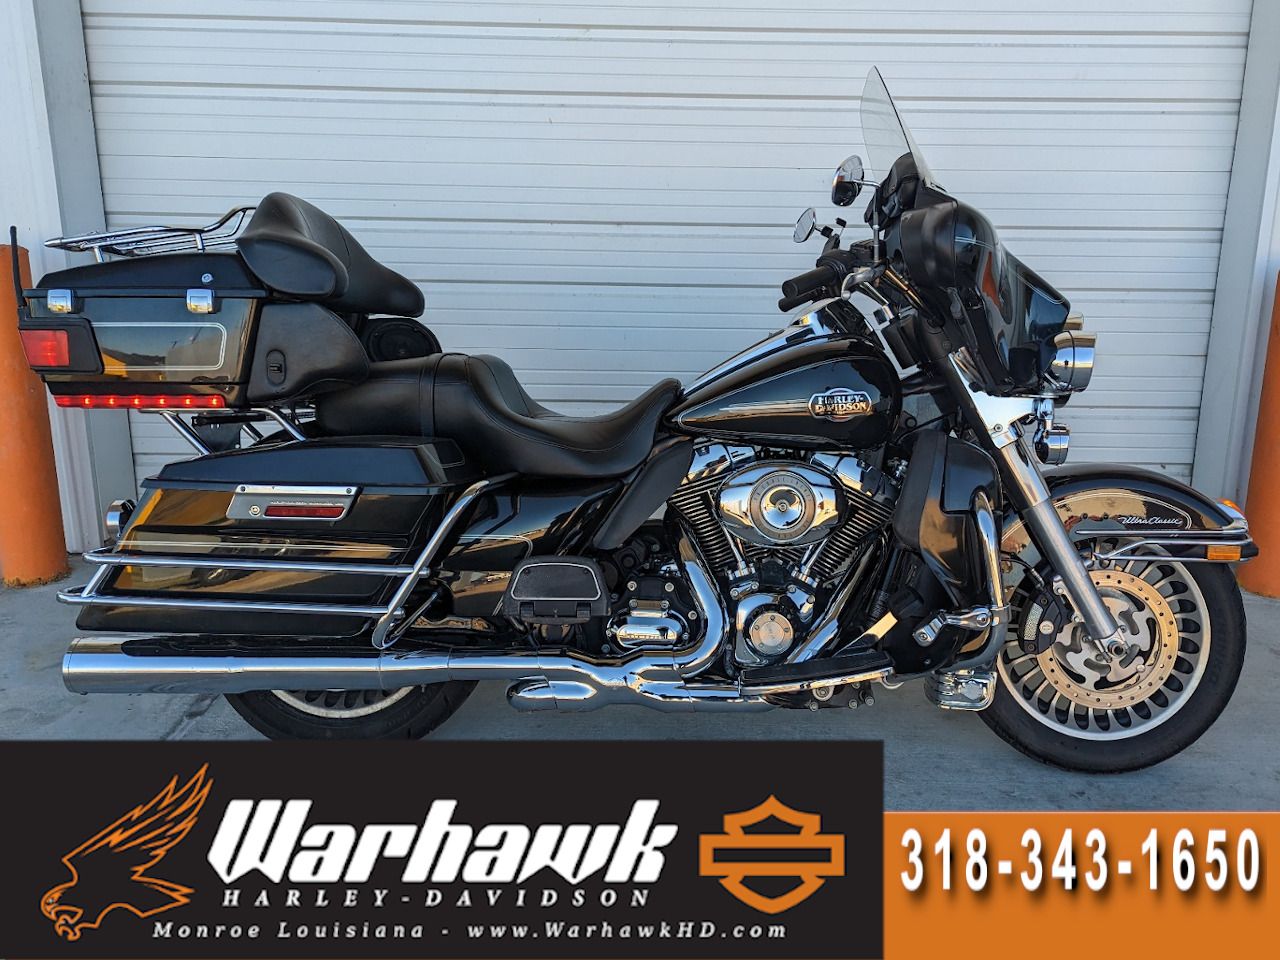 2011 harley-davidson ultra classic electra glide for sale near me - Photo 1